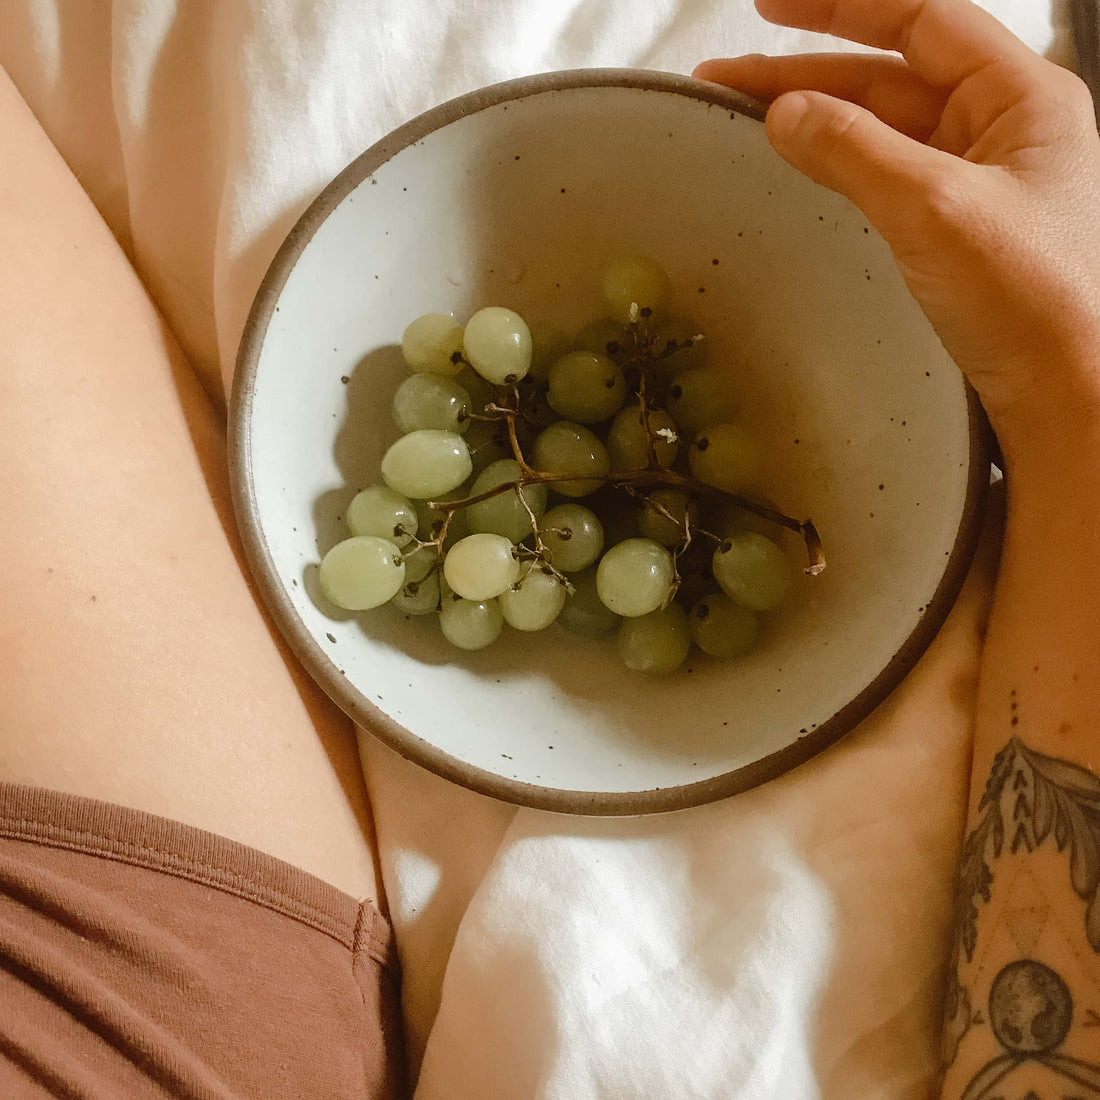 An above view of a leg and an arm laying on a white bed with a bowl of green grapes